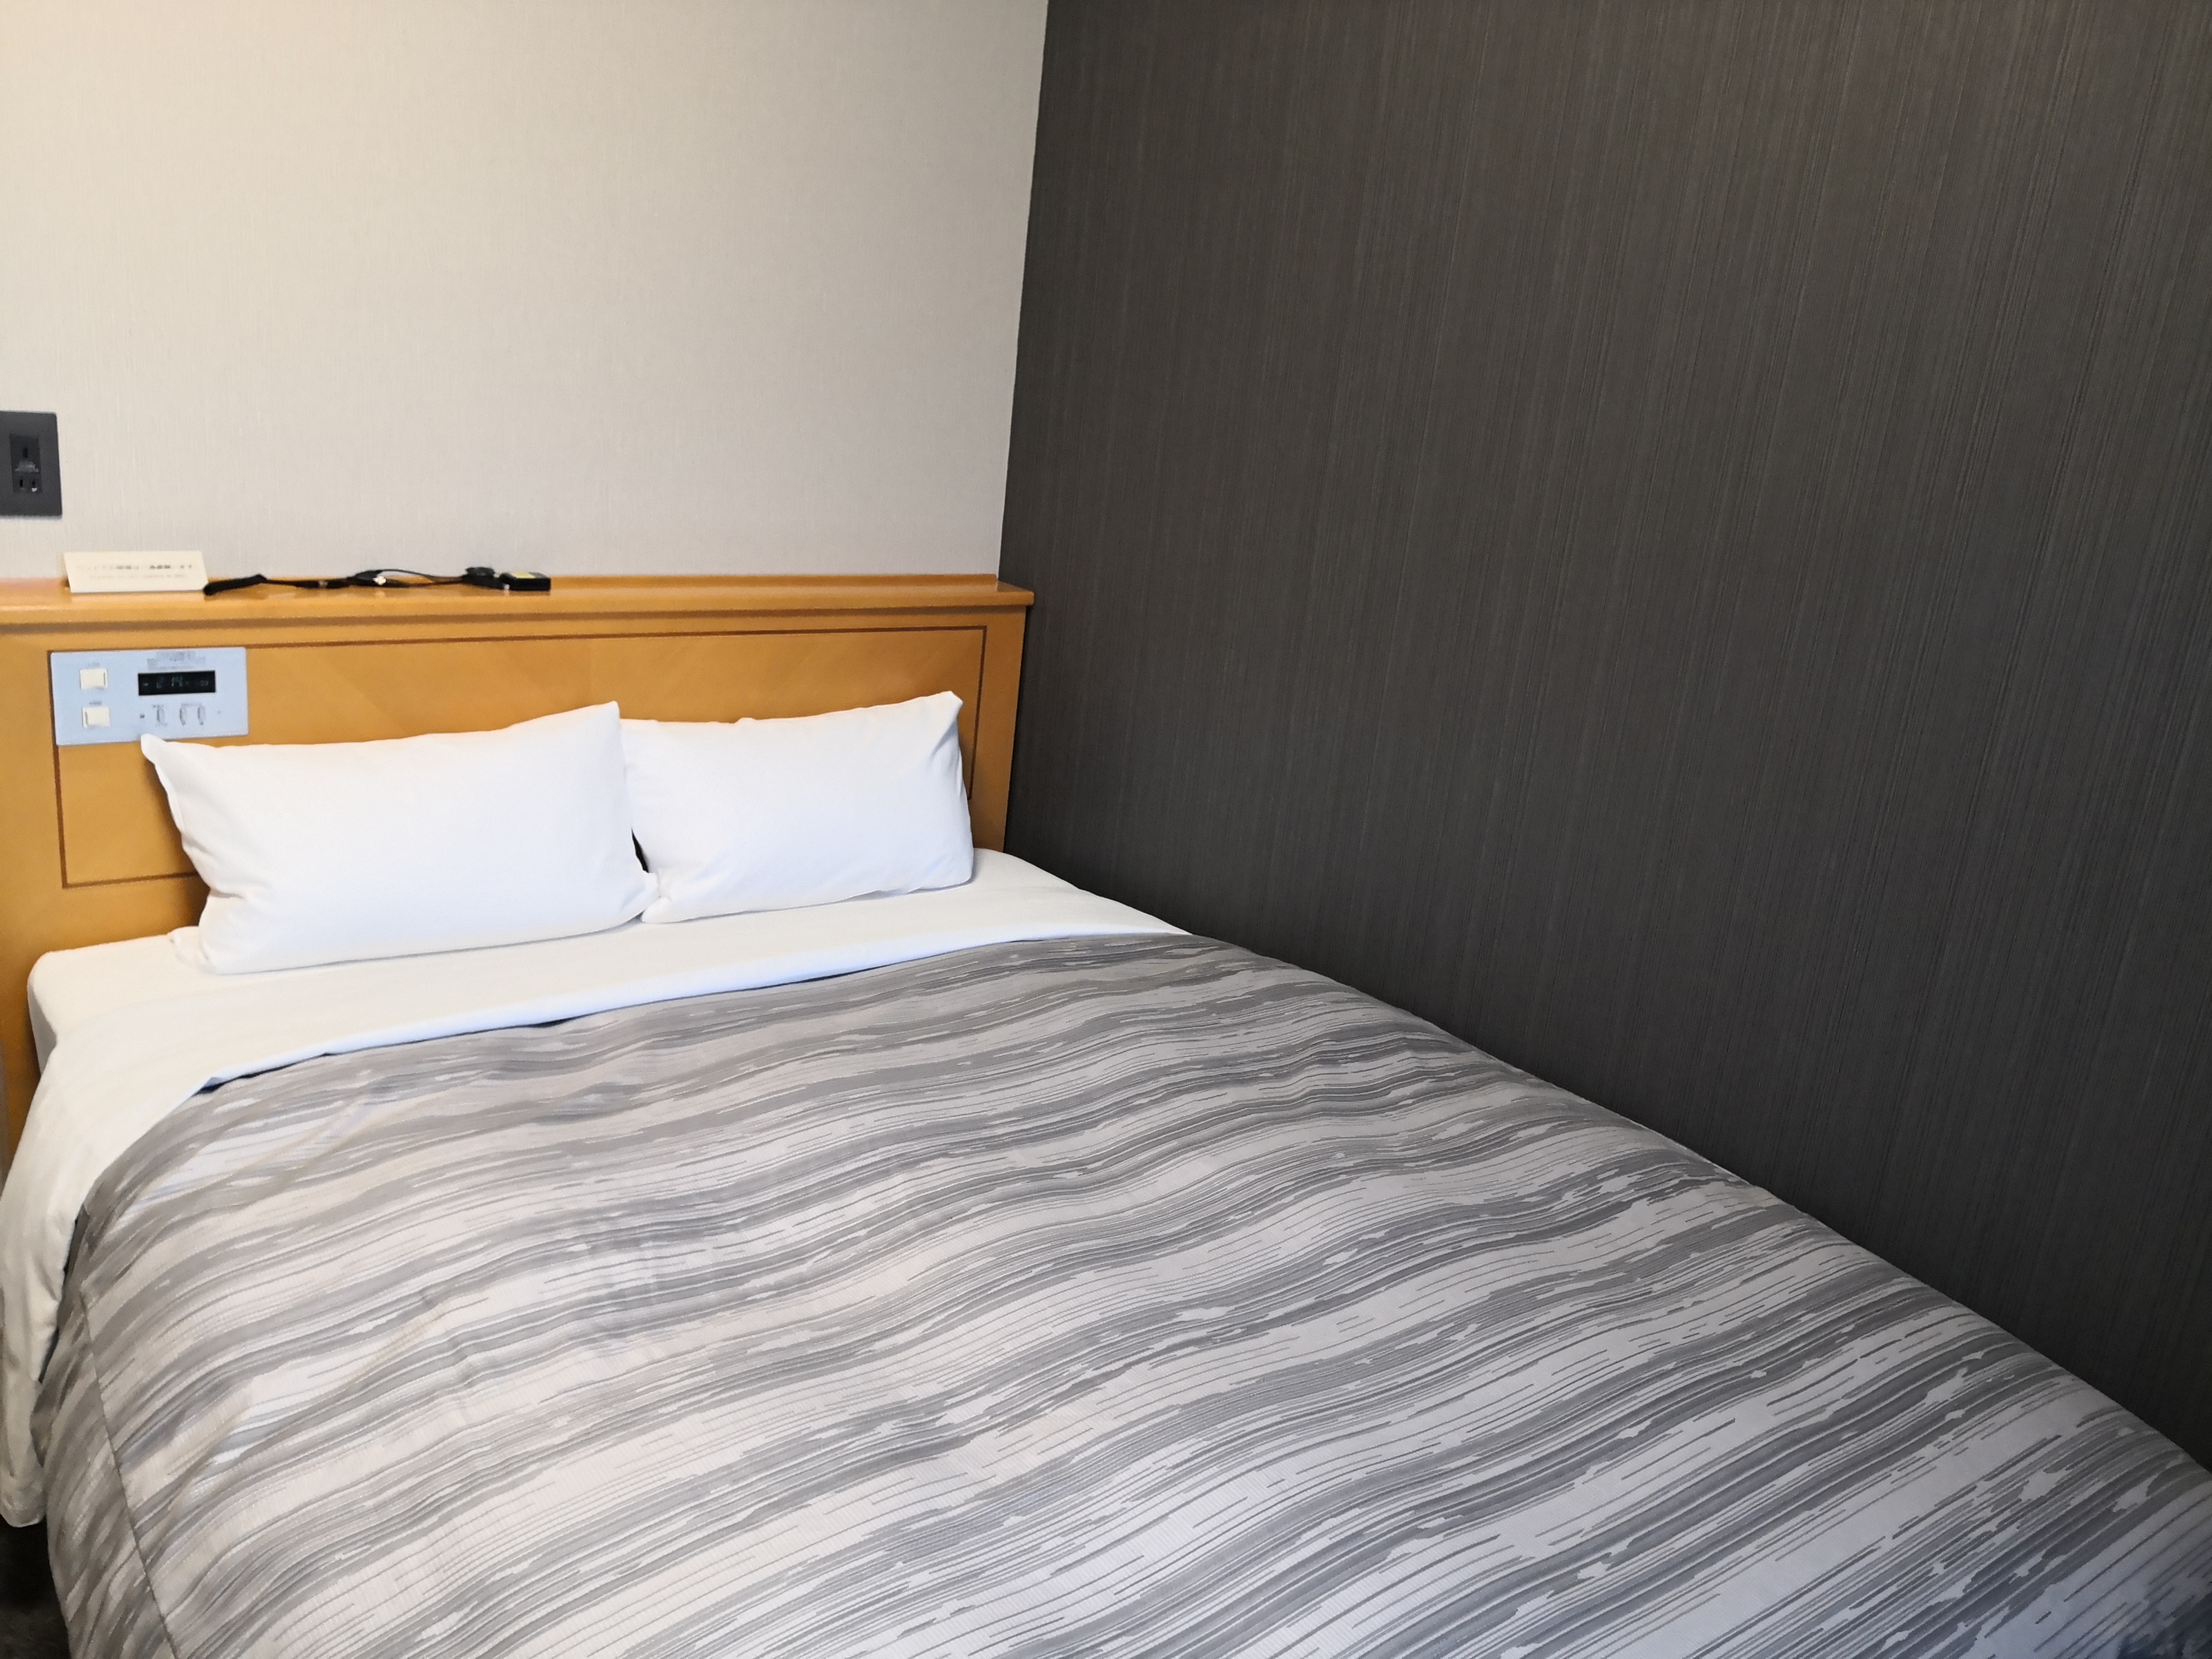 Semi-double room ◇ Renewal completed in August 2019 ◇ 140 cm wide spacious bed and free Wi-Fi